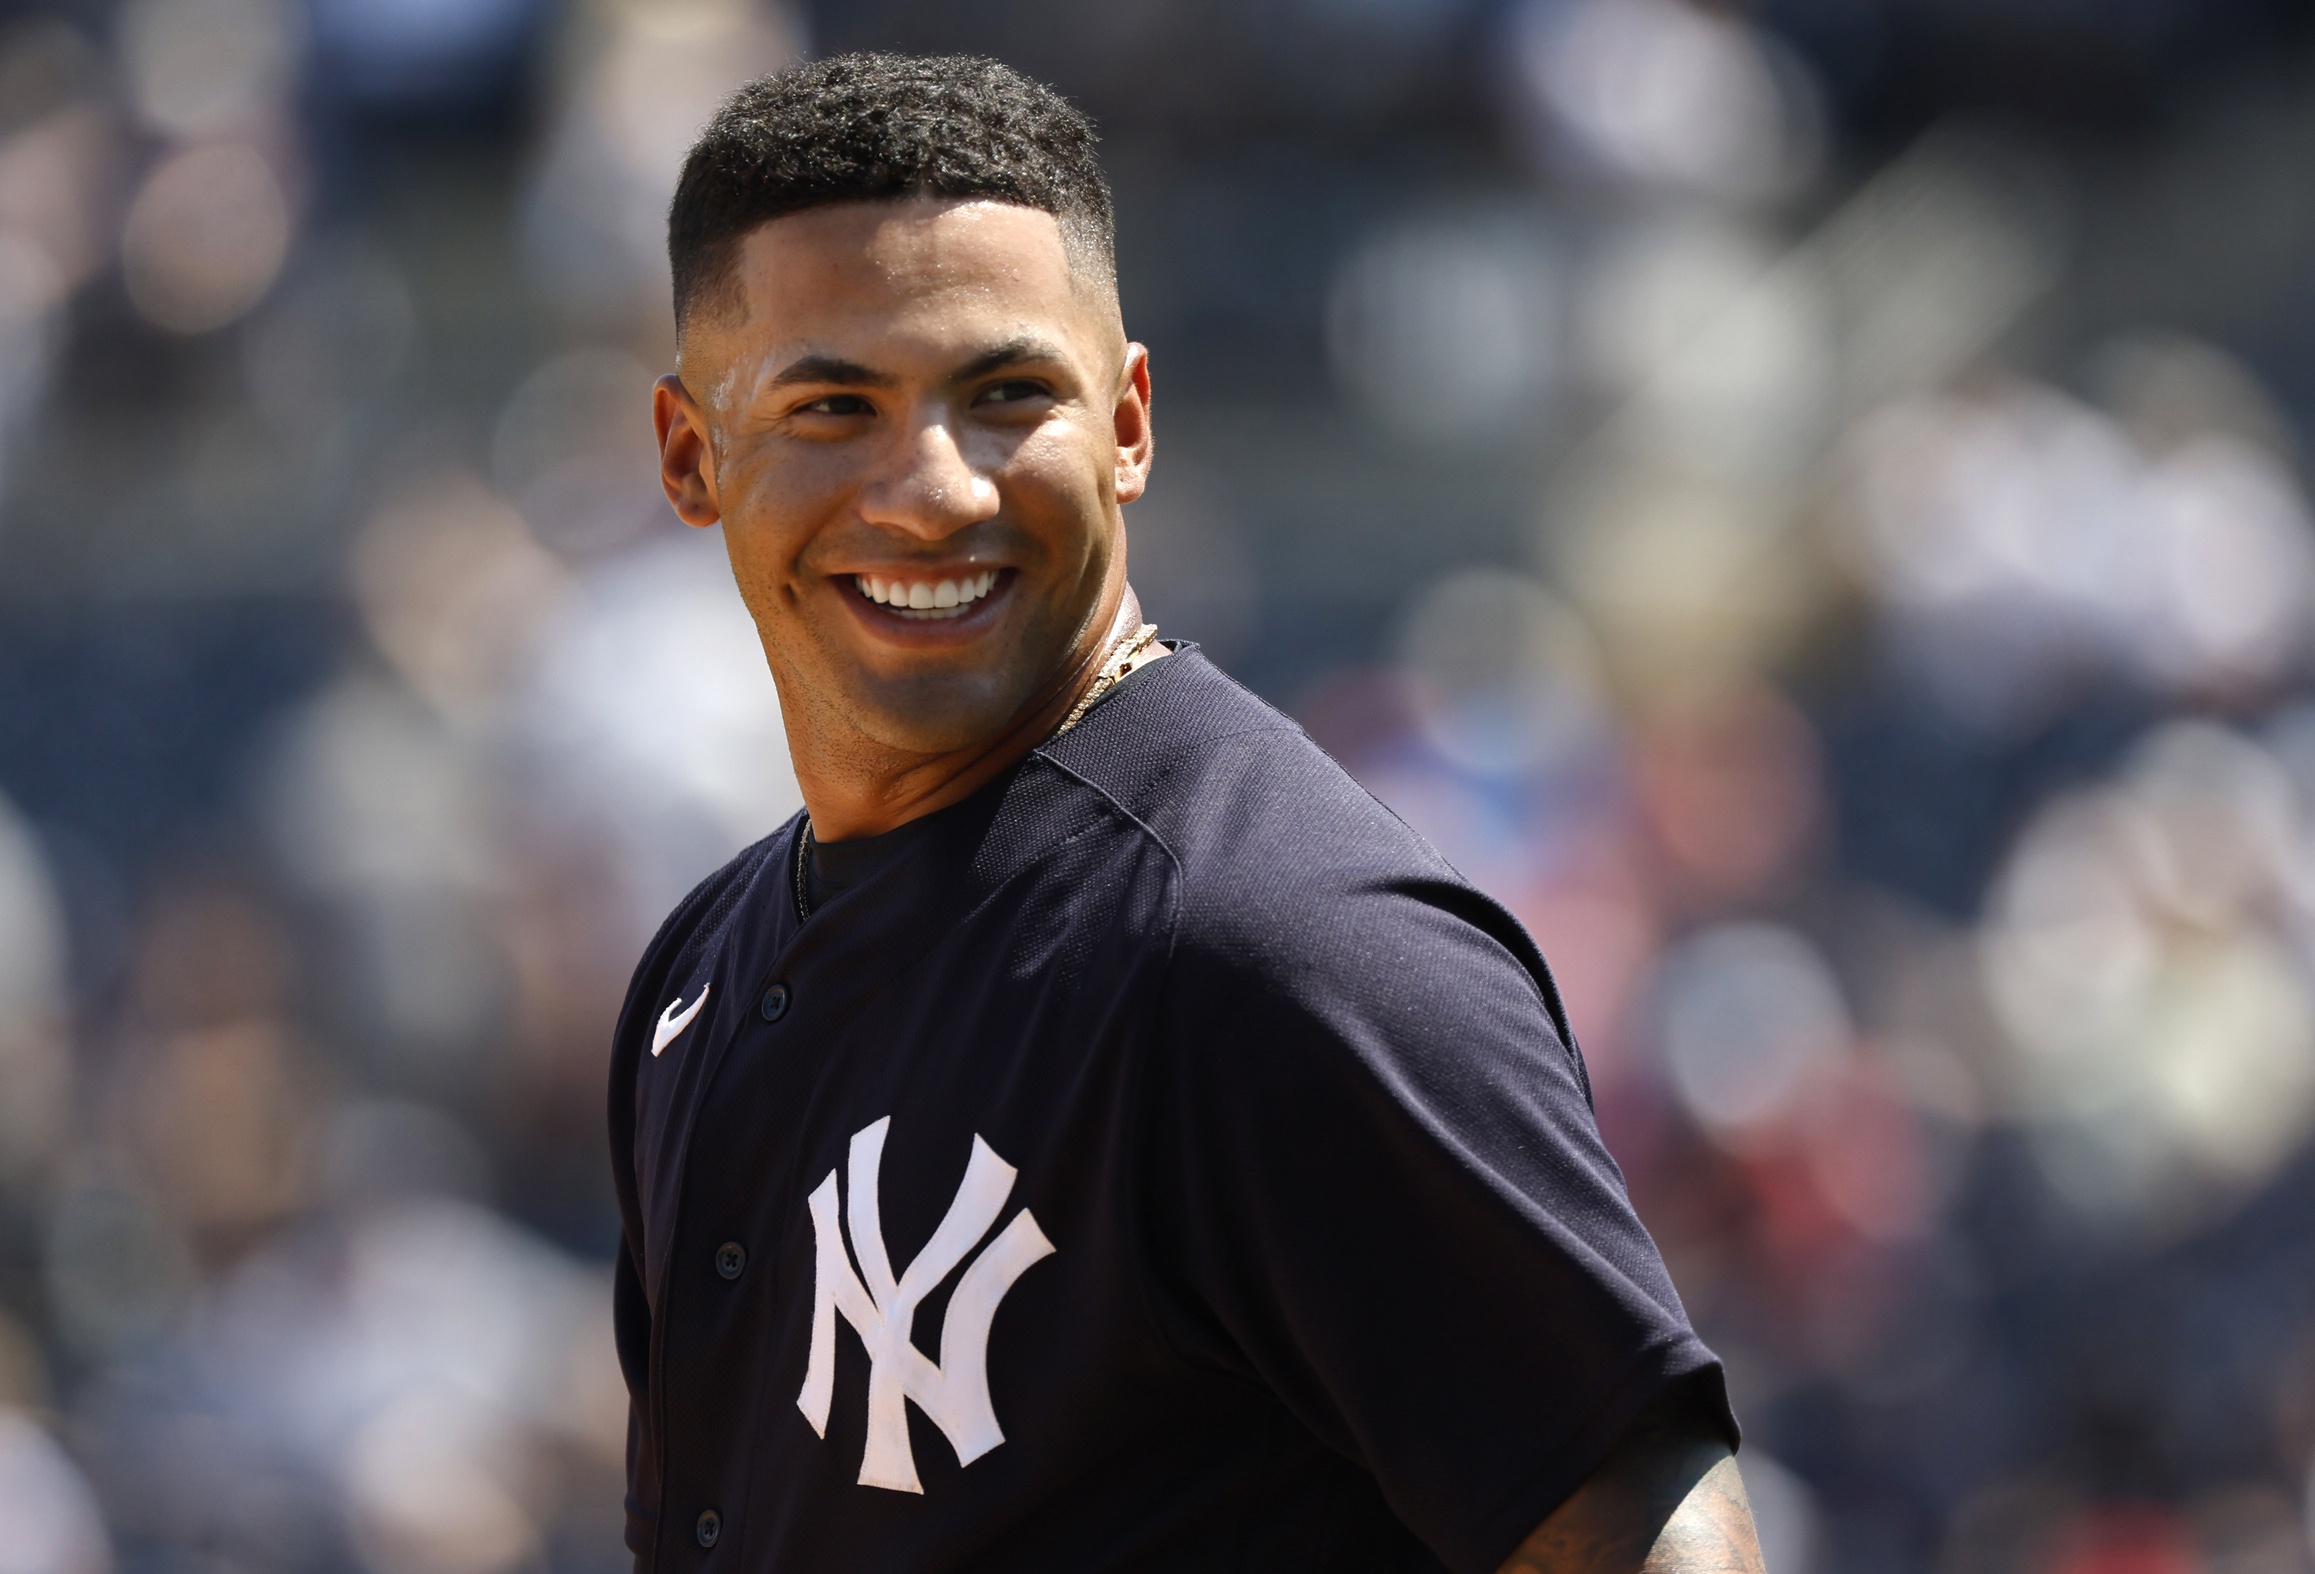 New York Yankees - Happy 21st birthday Gleyber Torres! 🎉🎊🎁 We can't wait  to see you back on the field soon!